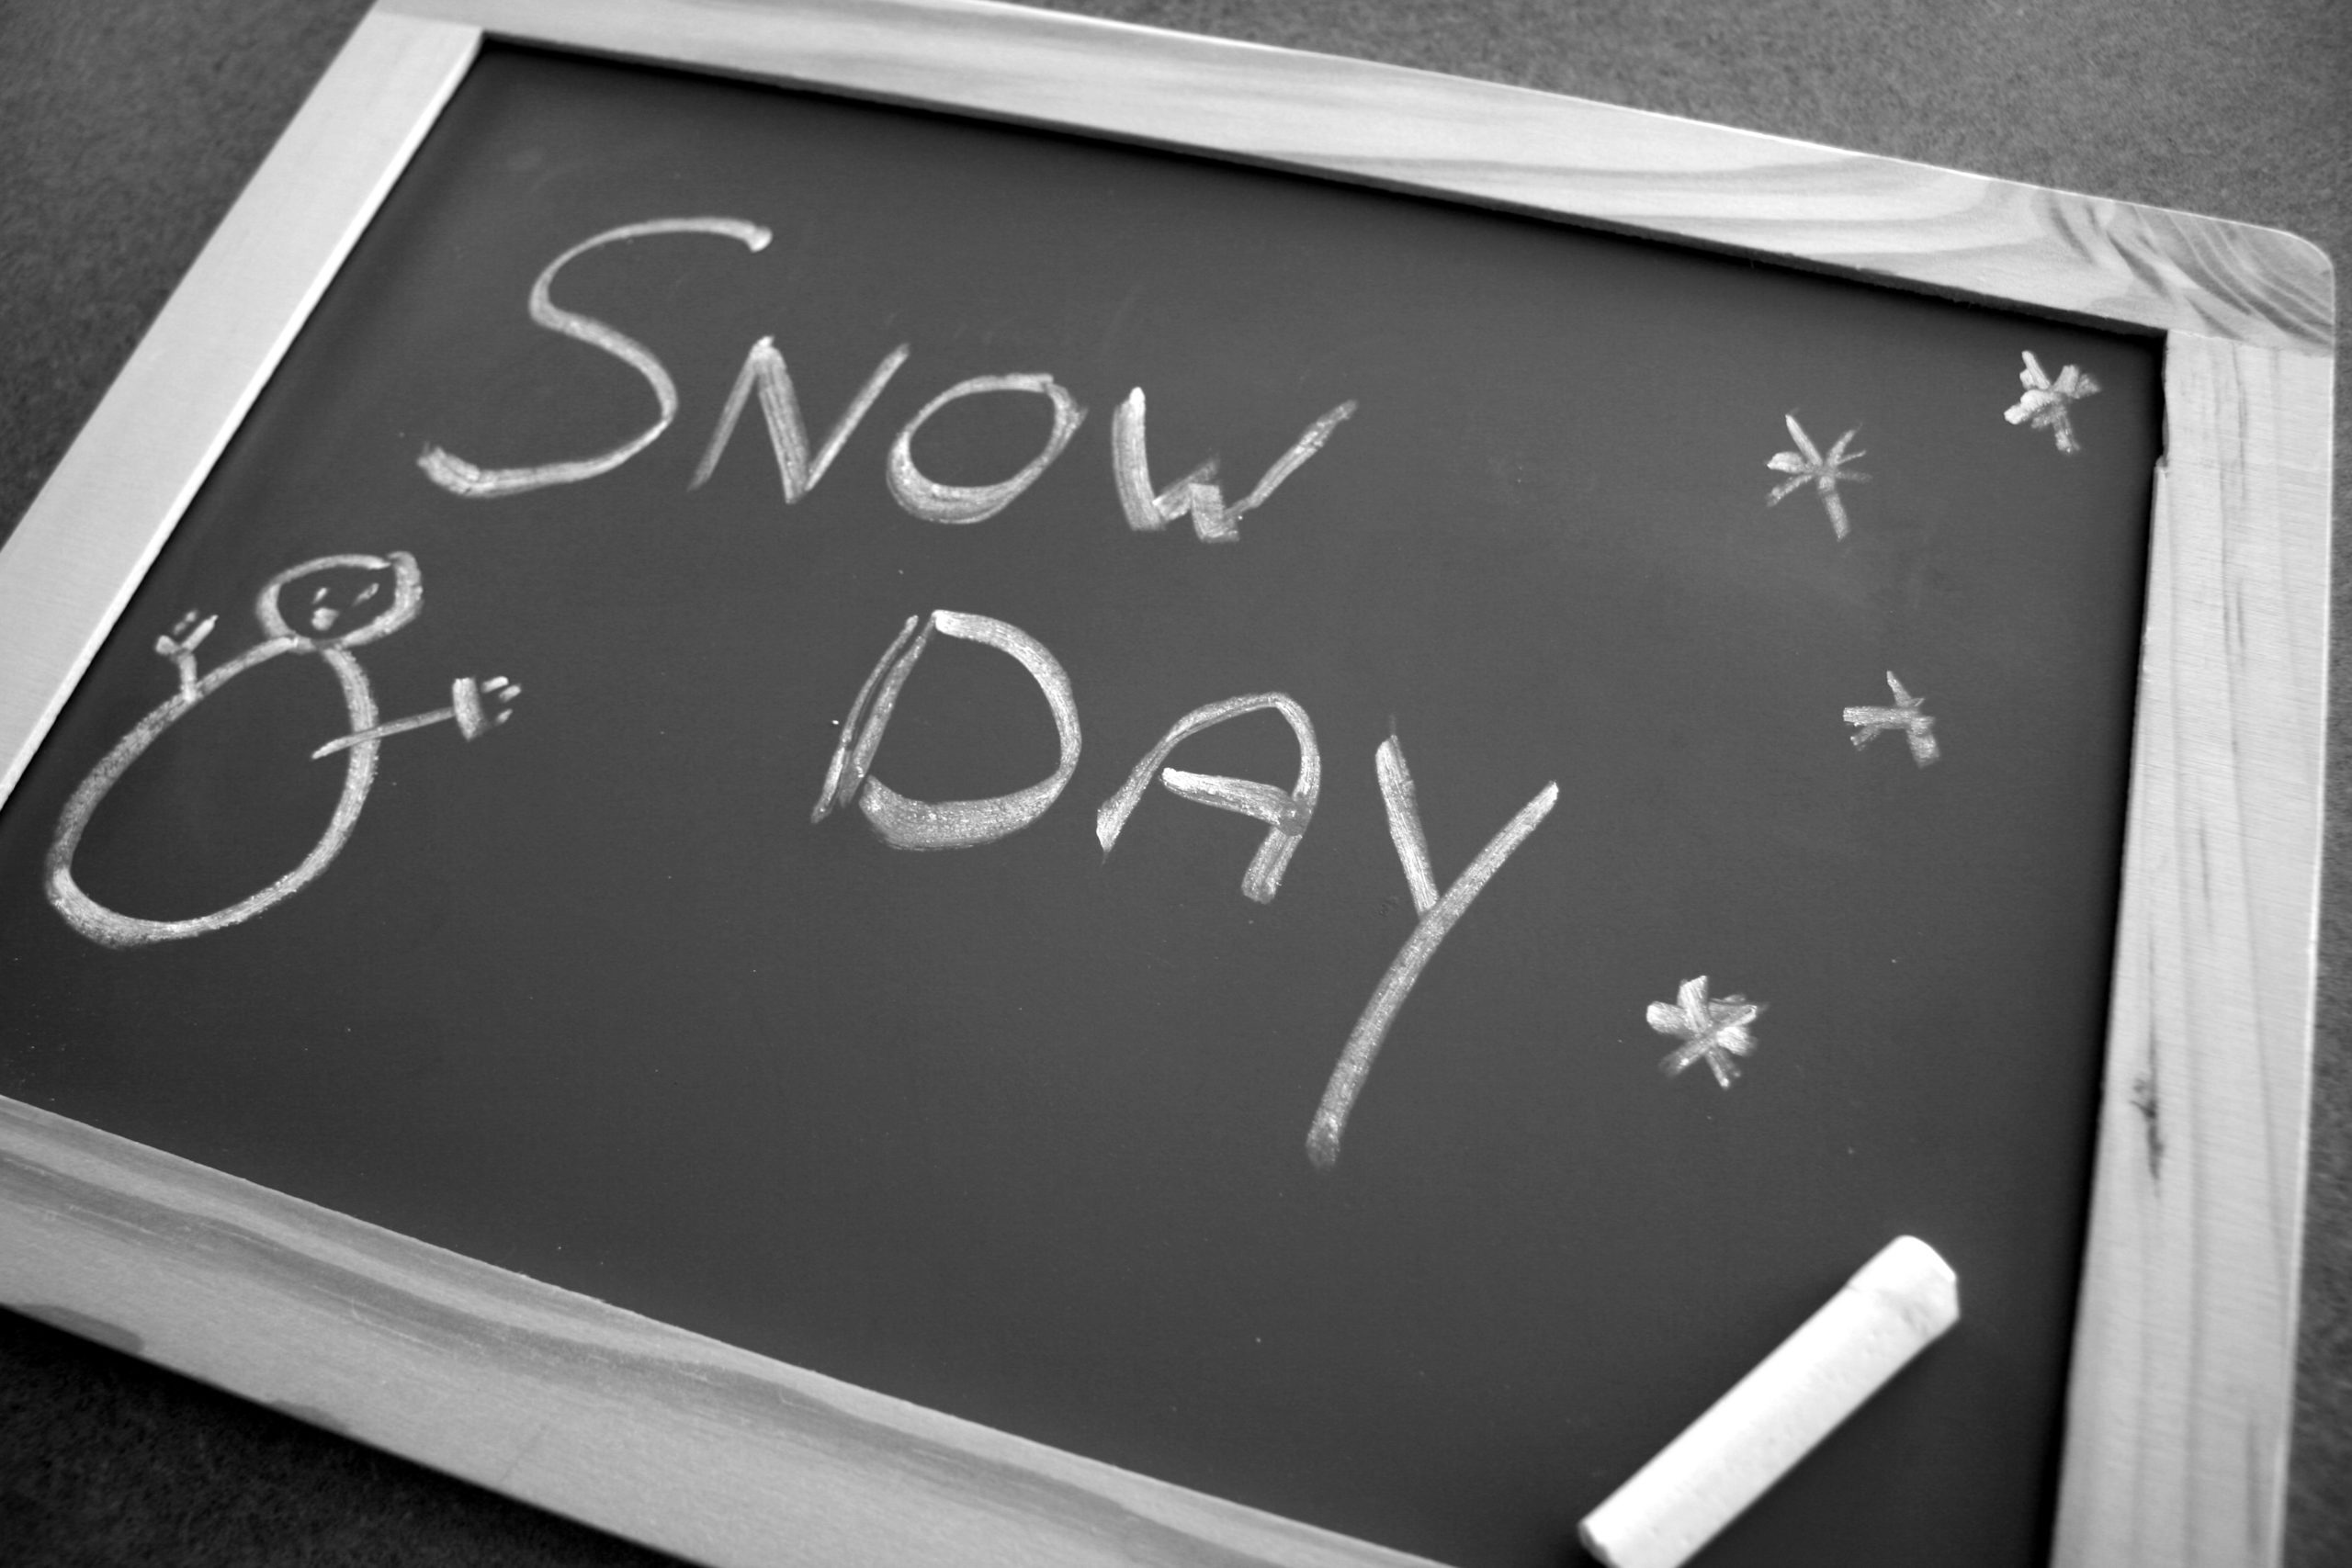 Snow Day written on chalkboard with drawing of snowman